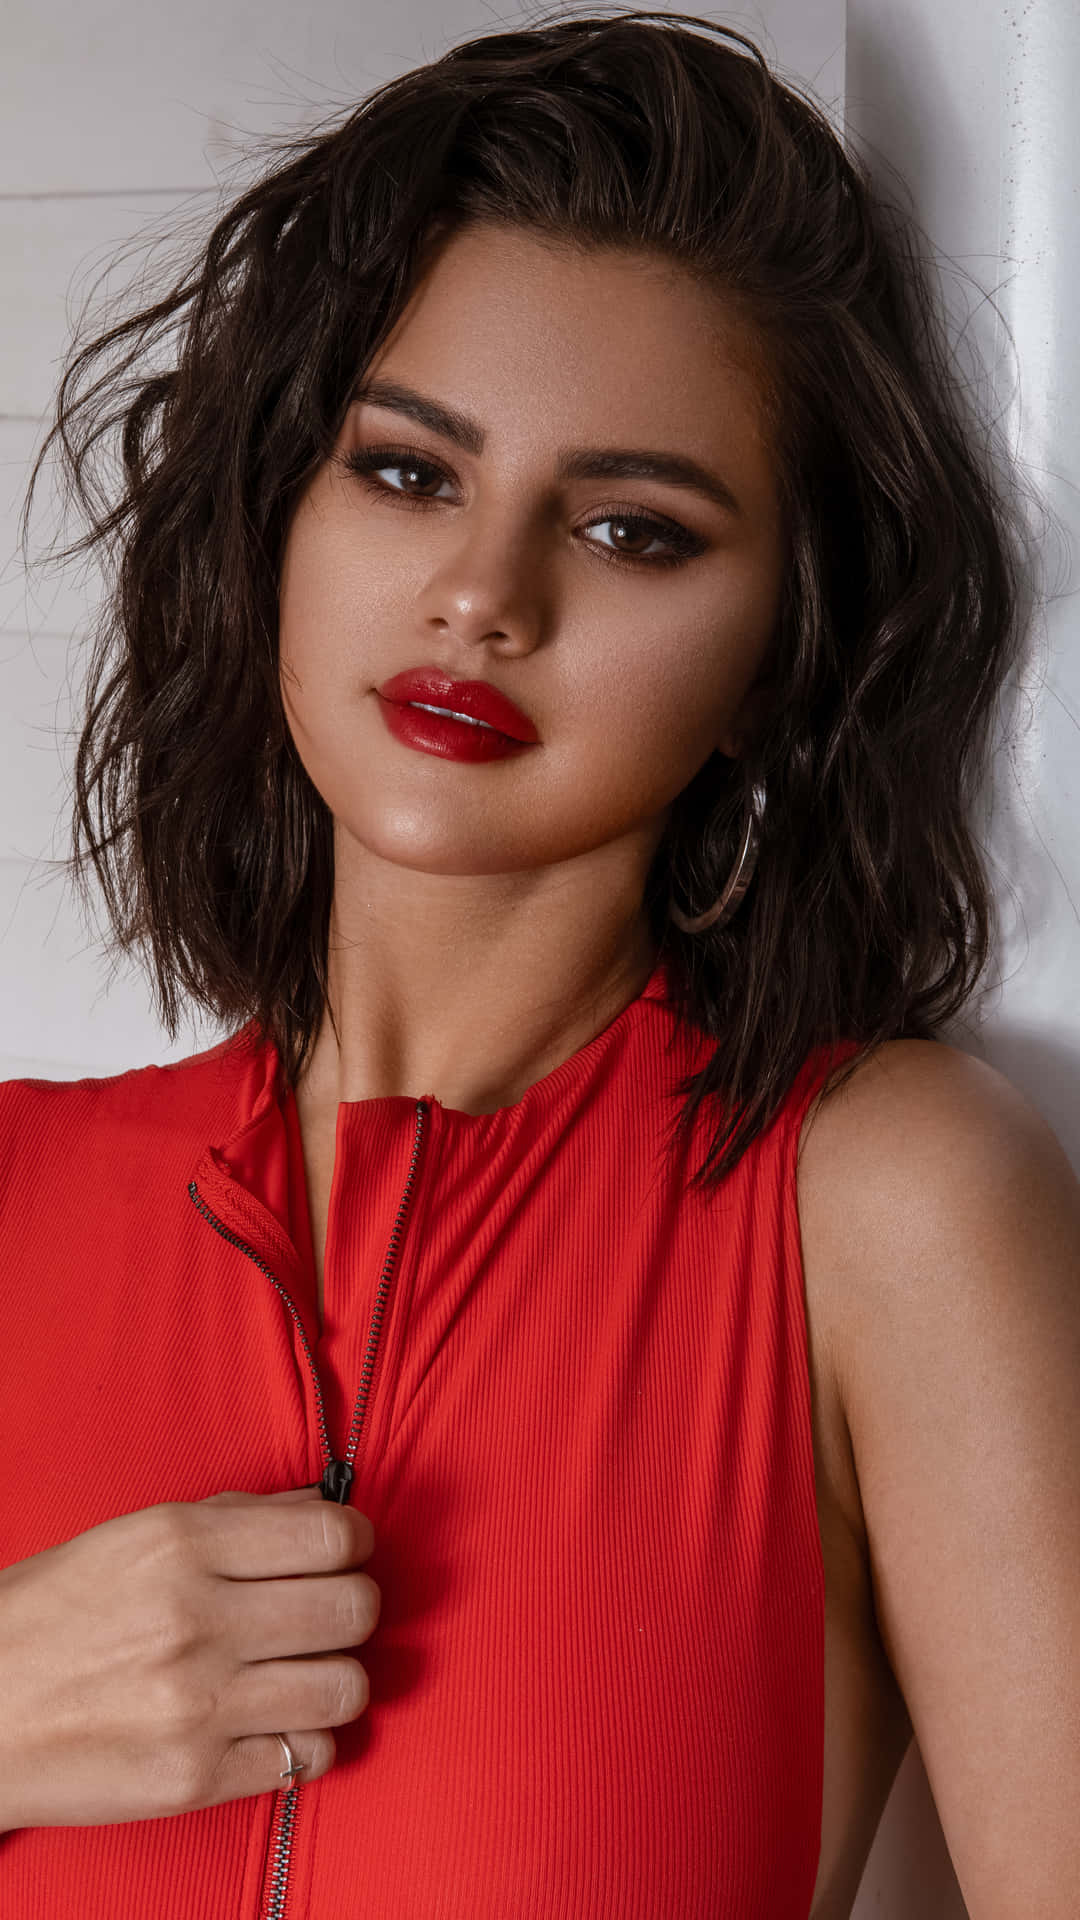 Stay connected to your favorite artist with Selena Gomez on your iPhone! Wallpaper